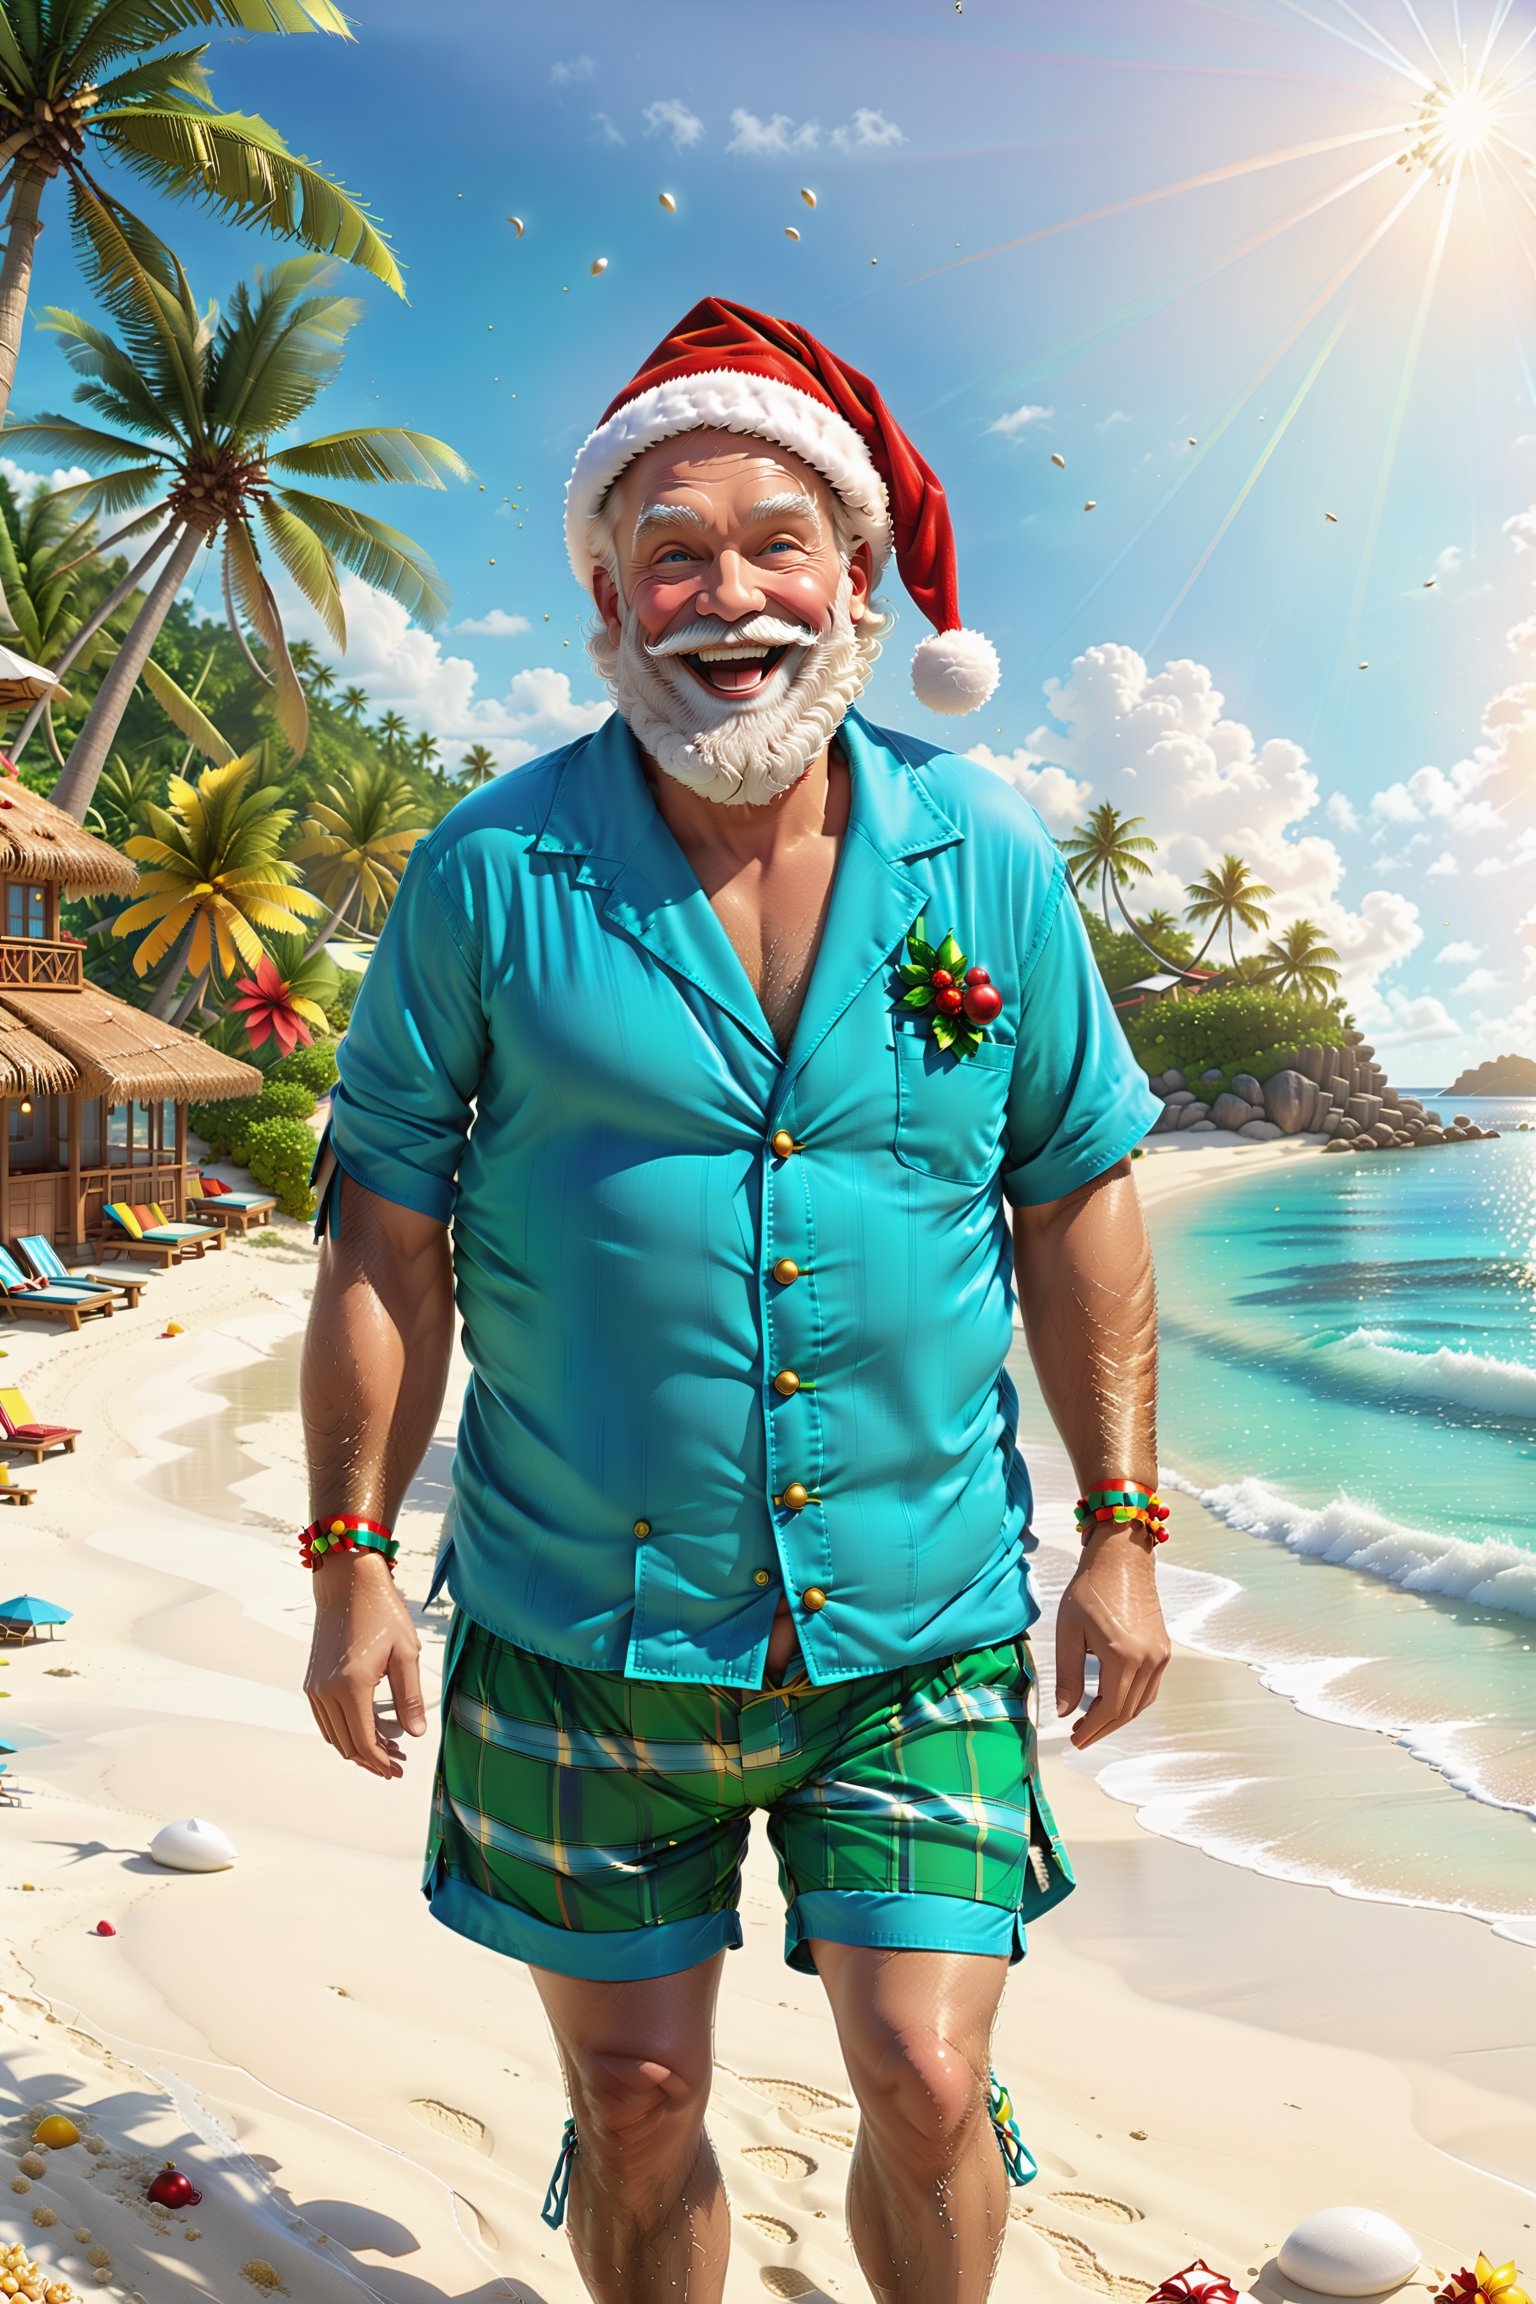 In this cheerful scene, {(((Santa Claus is on a sunny island)))}, embarking on an exotic Christmas vacation. The island is made up of golden sandy beaches, turquoise blue waters and emerald green coconut trees, just like a tropical paradise.

{(((Santa Claus is dressed in relaxed vacation attire, possibly a short-sleeved plaid shirt with loose shorts and comfortable flip-flops)))}. He held a colorful parasol in his hand, swaying gently with the breeze, as if he was enjoying this paradise-like resort.

Santa Claus steps onto the soft sandy beach with a string of coconut trees swaying lazily behind him. He may also be carrying a colorful surfboard, decorating the whole scene with even more energy. Or maybe he's holding a string of bright Christmas lights in his hand, dotting the coconut trees and bringing a festive atmosphere to this beach.

The ocean sparkles in the distance, welcoming the waves that gently lap on the beach. Perhaps there is a small boat moored in the distance, waiting for the next sea adventure. The whole image reveals a relaxed, pleasant and festive delight, giving a Christmas atmosphere that is different from the traditional but equally cozy.